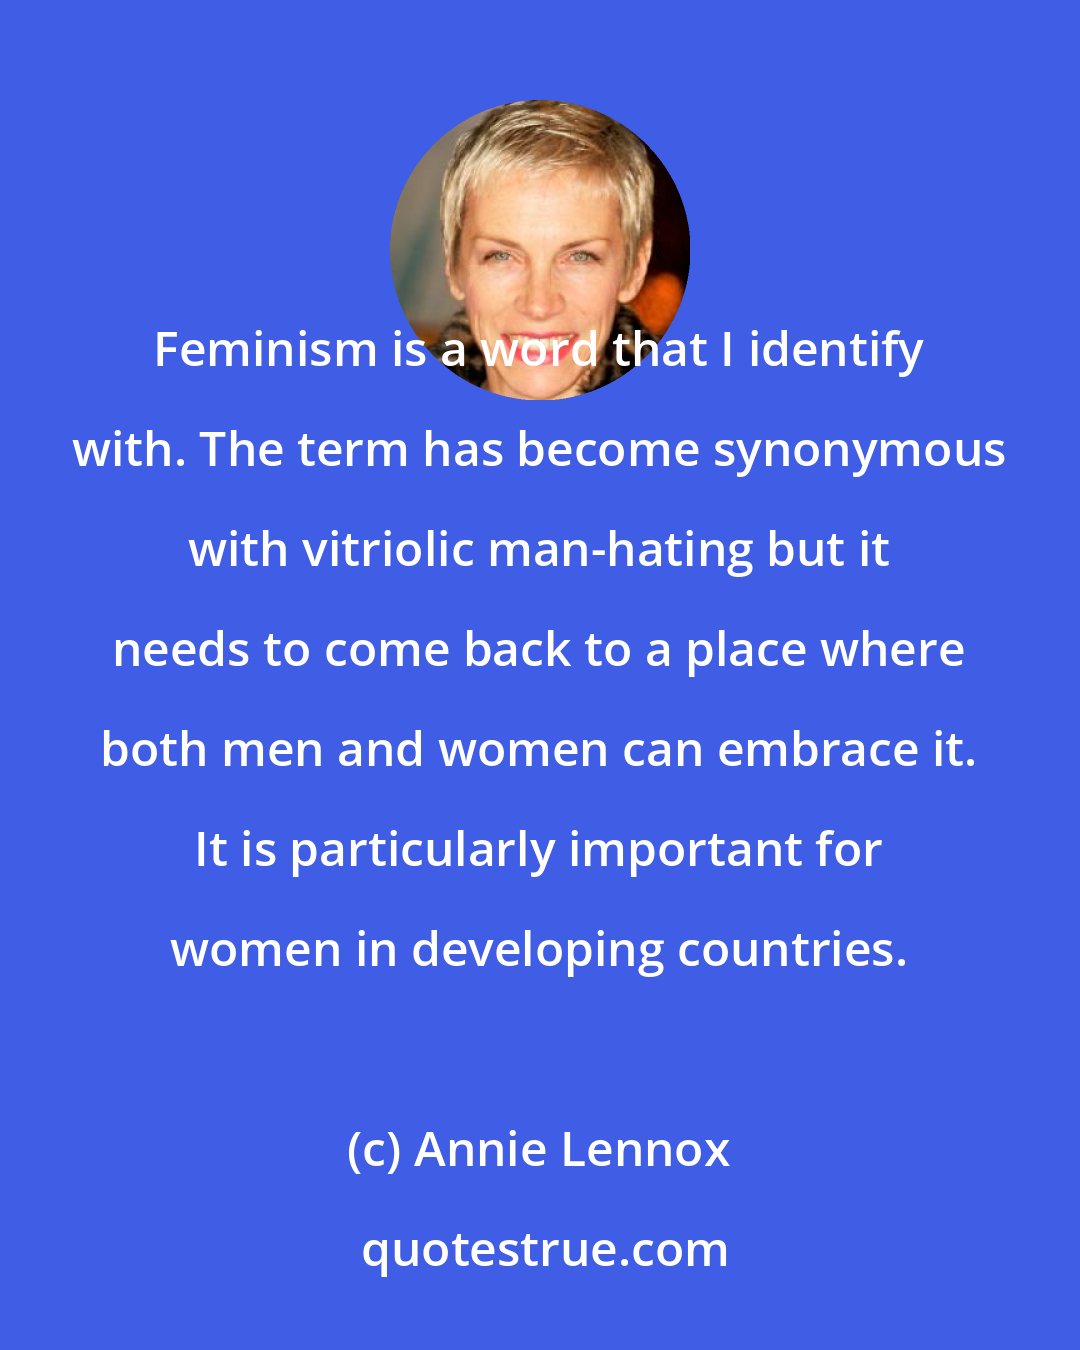 Annie Lennox: Feminism is a word that I identify with. The term has become synonymous with vitriolic man-hating but it needs to come back to a place where both men and women can embrace it. It is particularly important for women in developing countries.